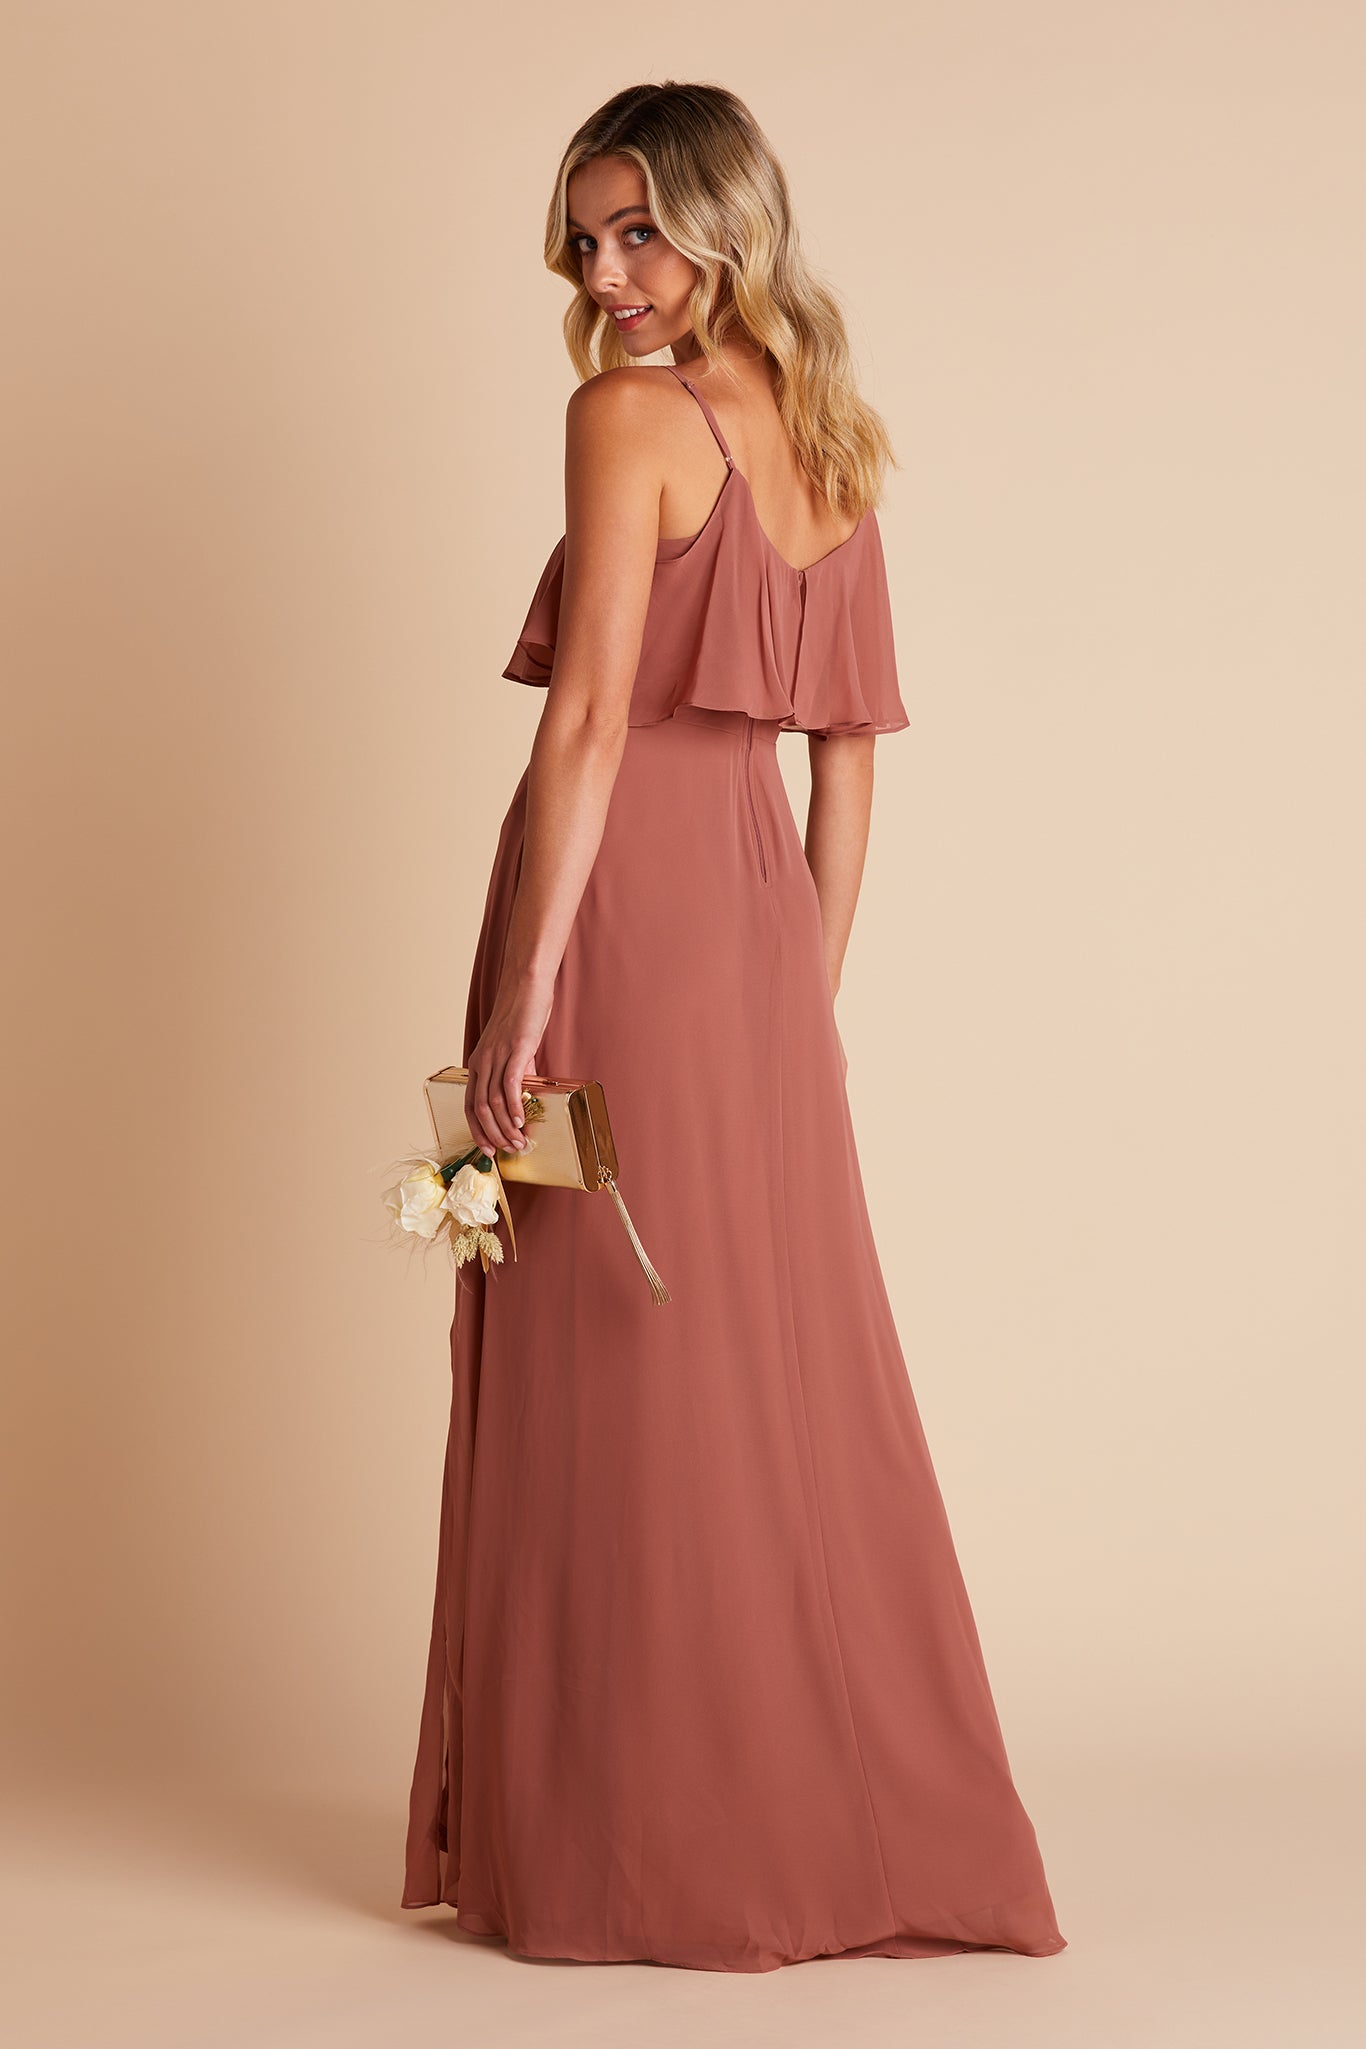 Jane convertible bridesmaid dress with slit in desert rose chiffon by Birdy Grey, side view